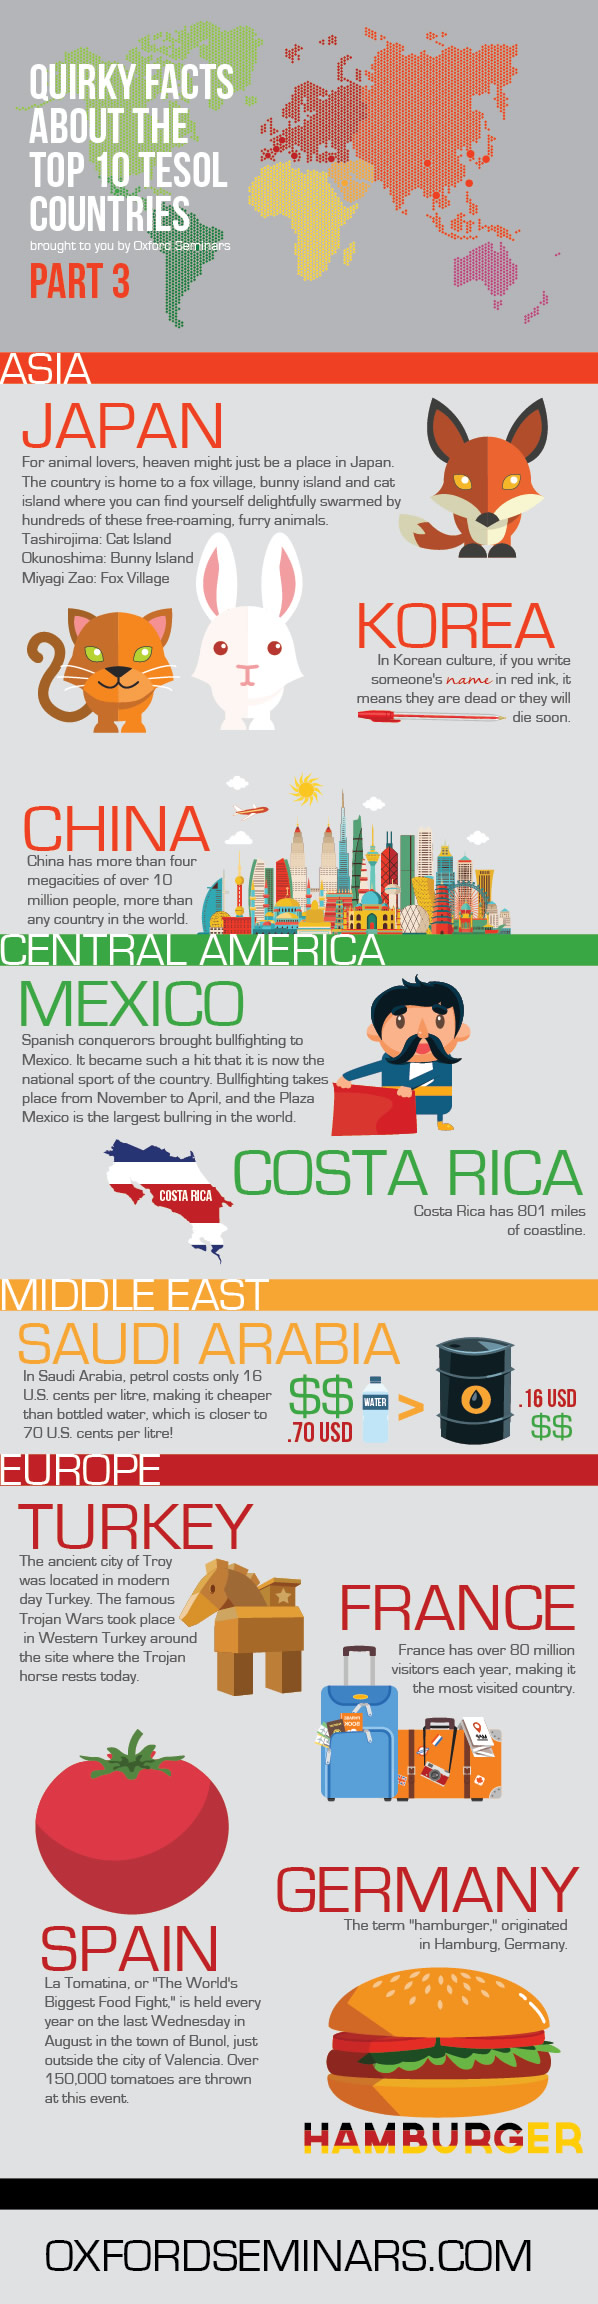 Quirky Facts about the top 10 TESOL Countries - Part 3 - Infographic